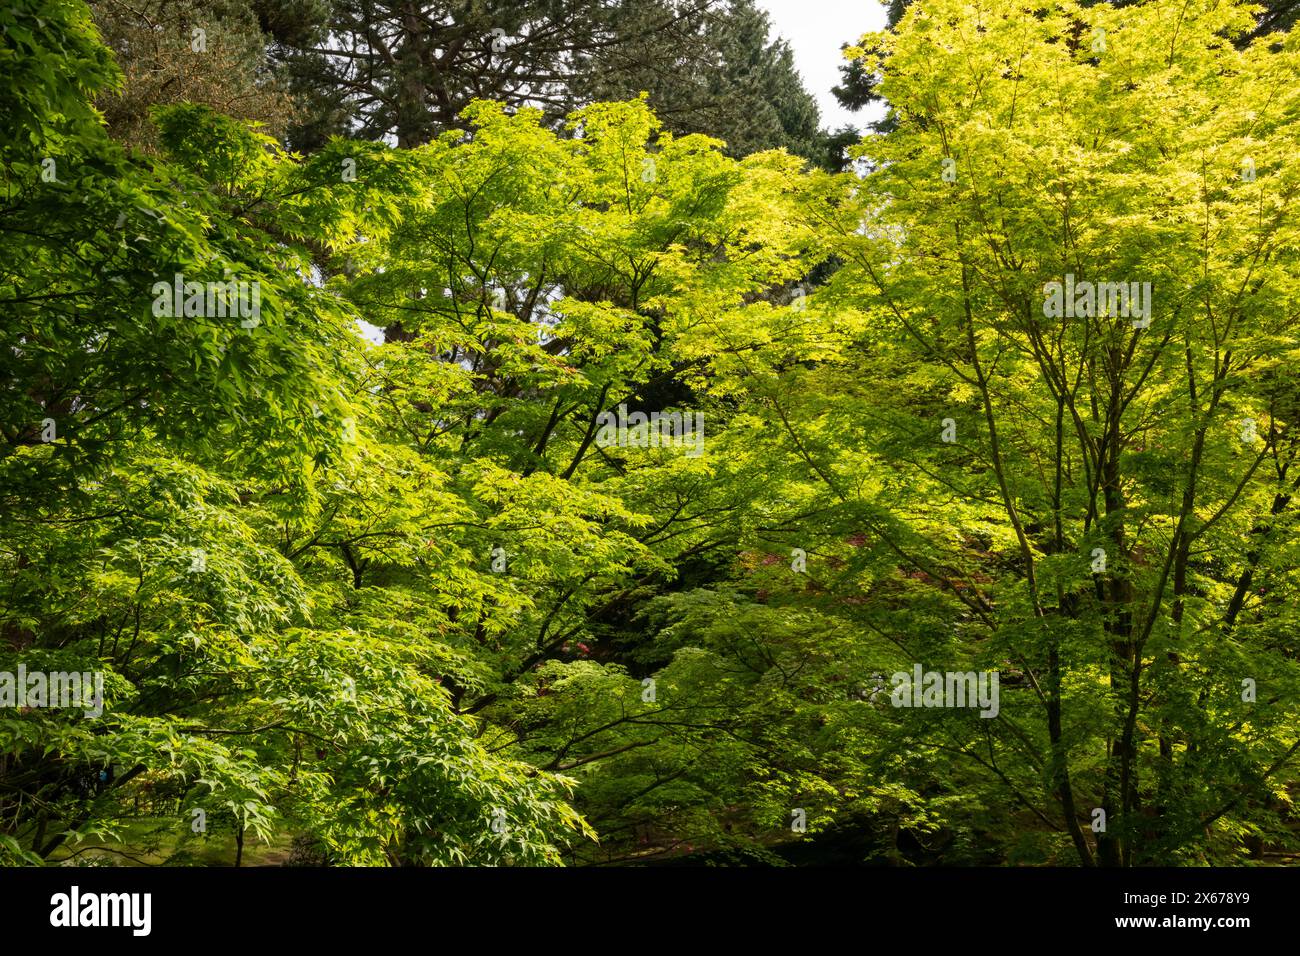 Spring sunlight making the new foliage of a Japanese Acer with pale green leaves glow. Stock Photo